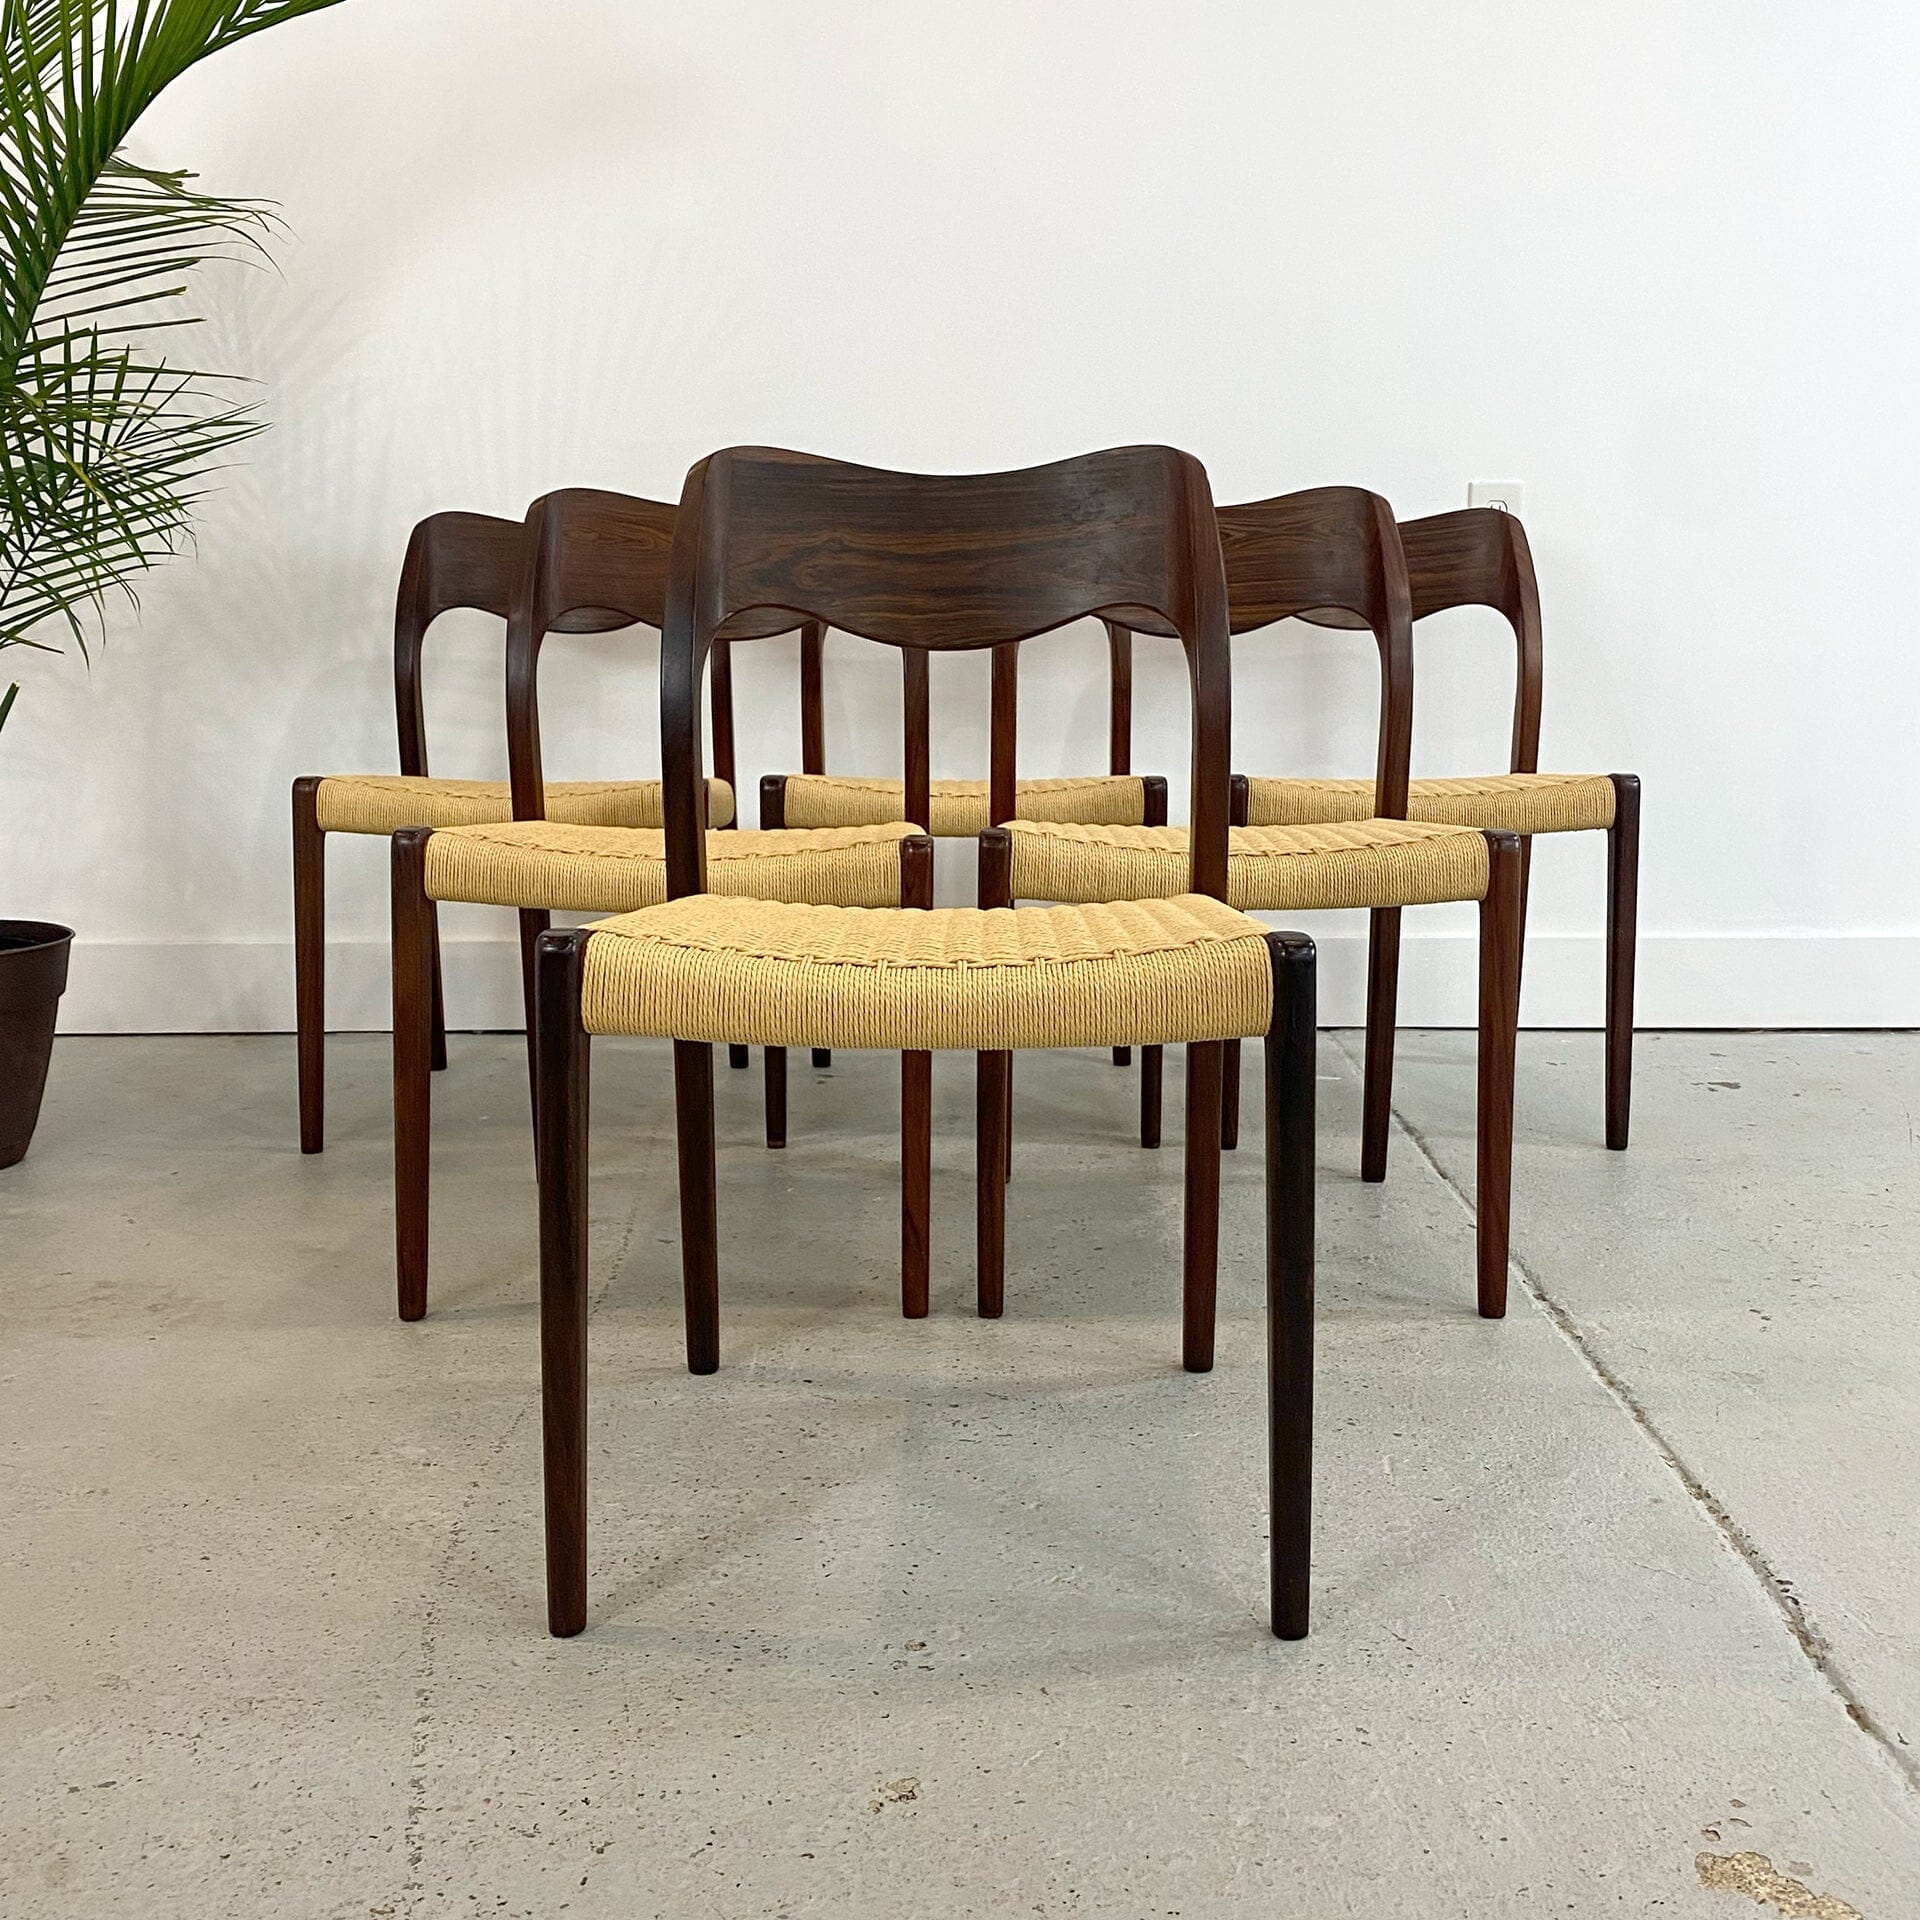 Møller Model 71 Dining Chairs in Rosewood and Paper Cord Seats Dining Chairs J.L. Møllers Møbelfabrik 